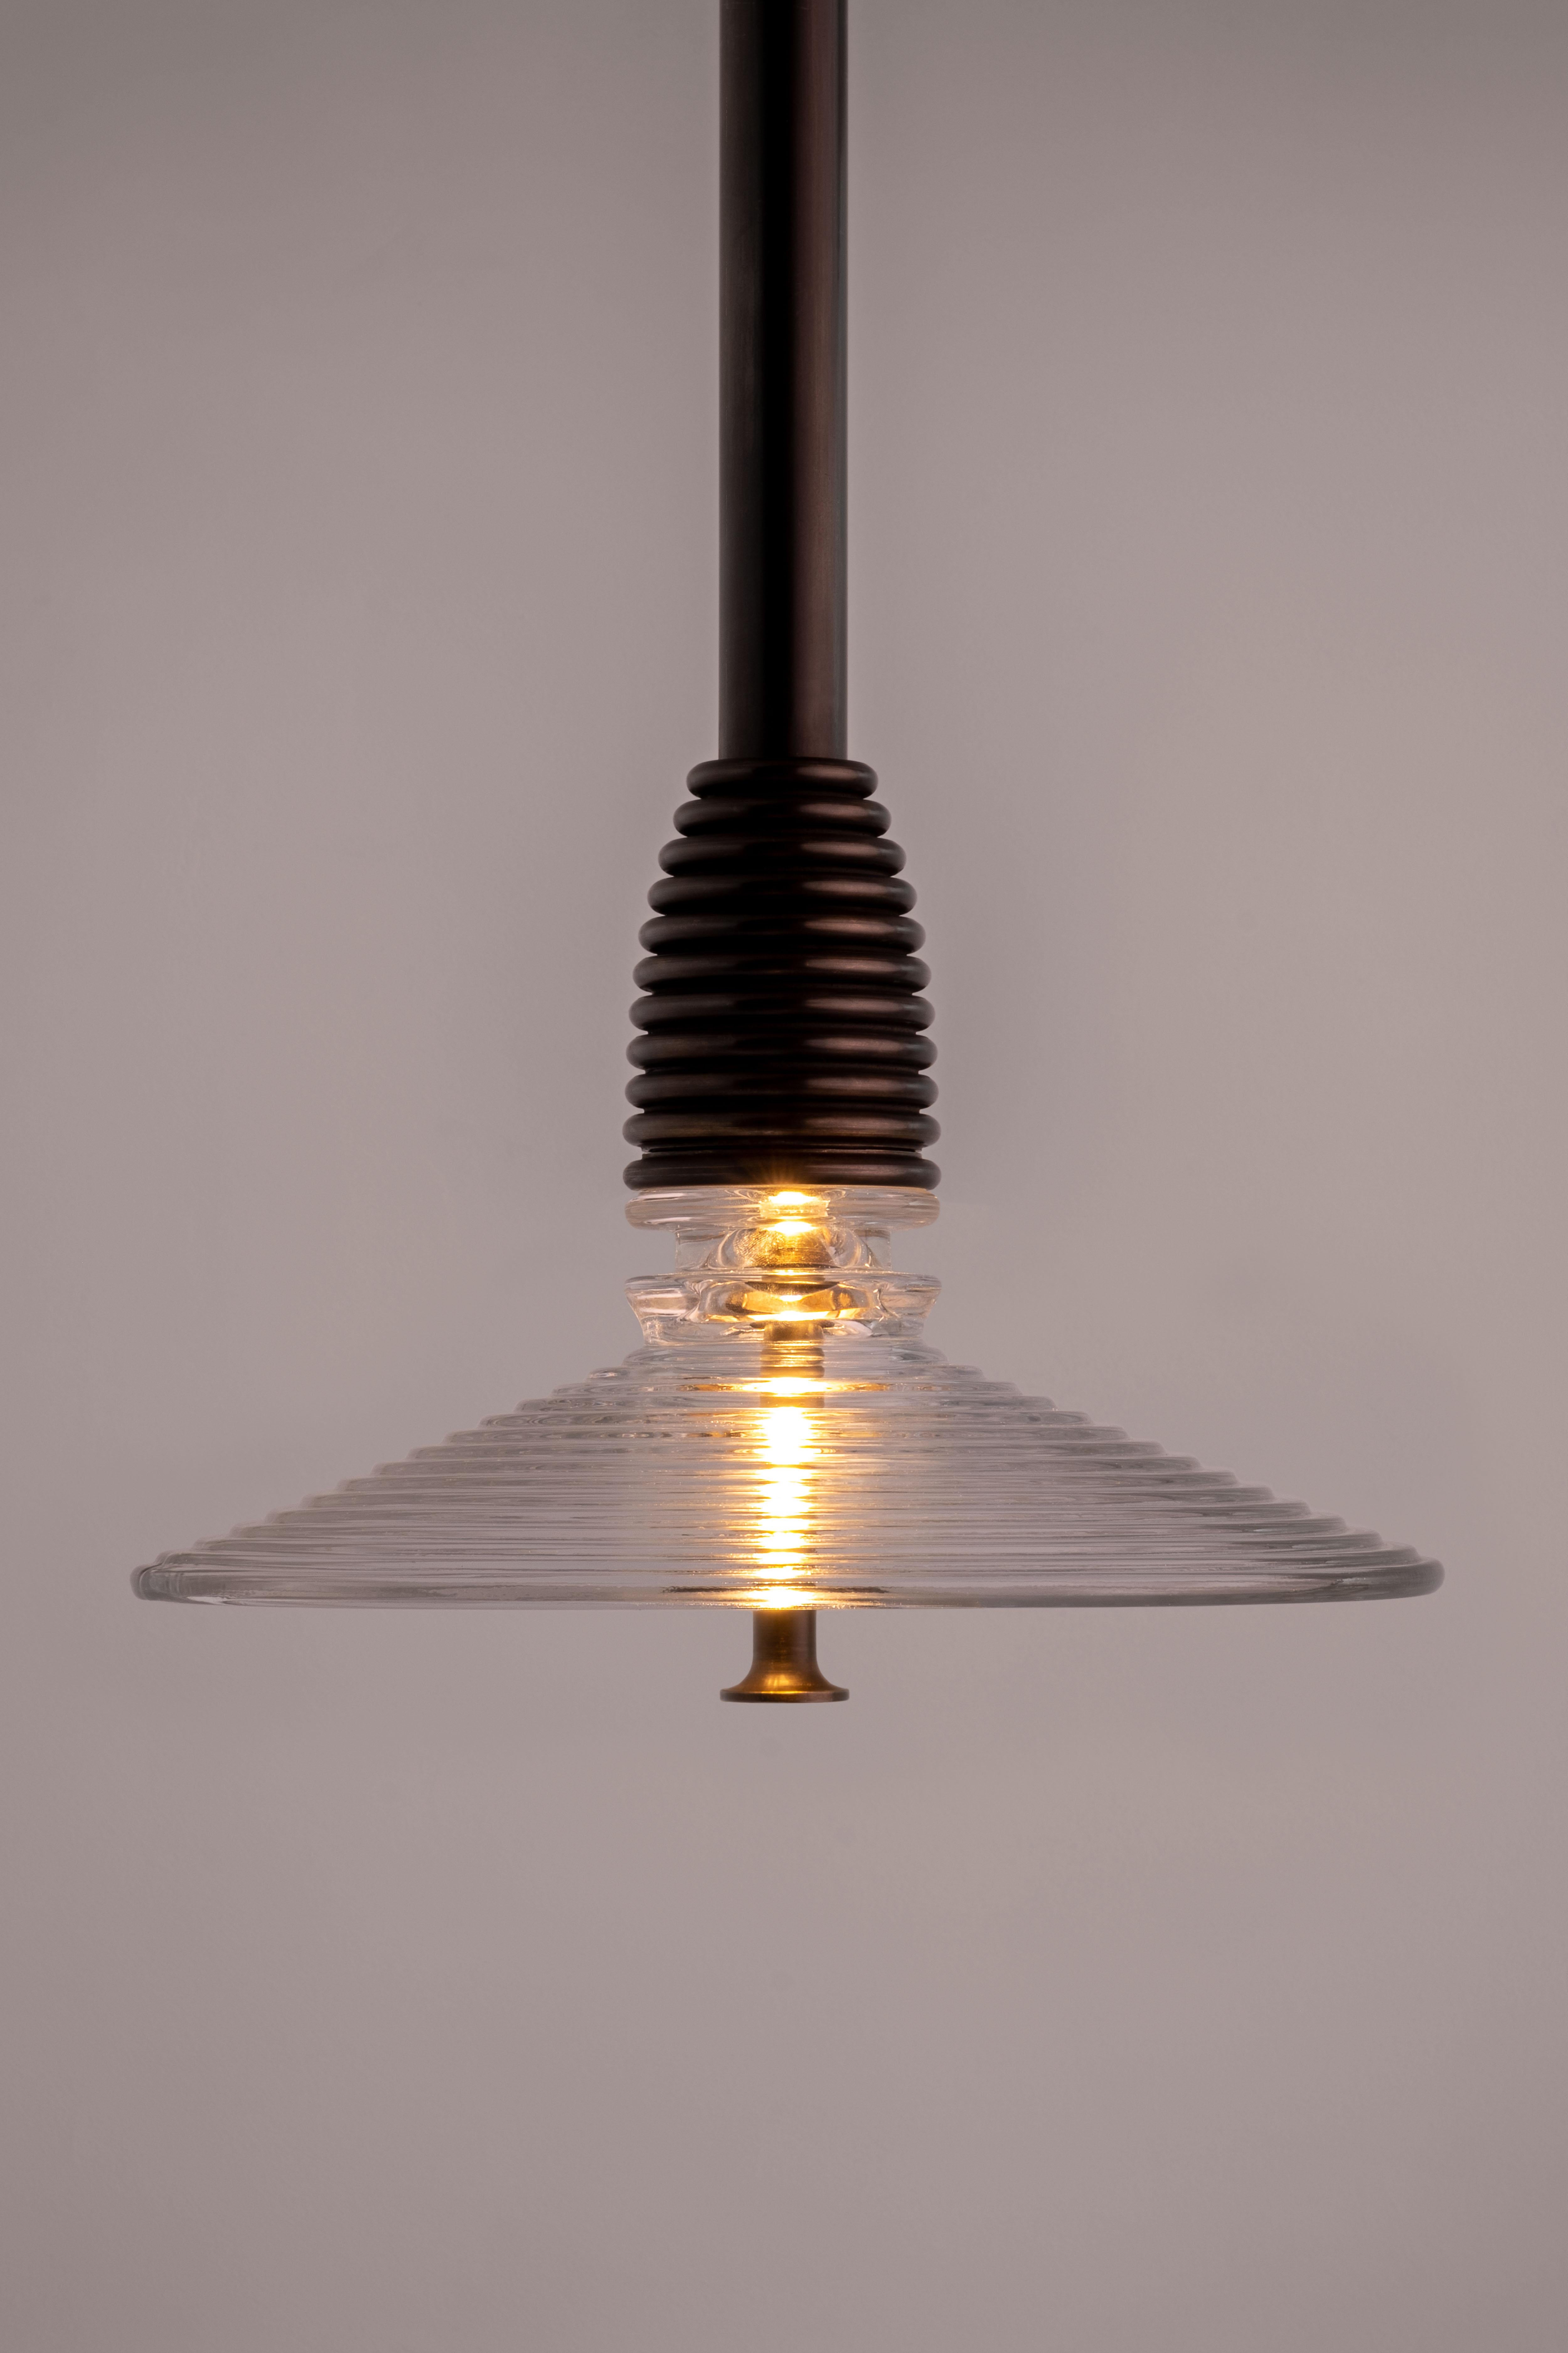 The Insulator 'B' Pendant in dark brass and frosted glass by NOVOCASTRIAN deco For Sale 13